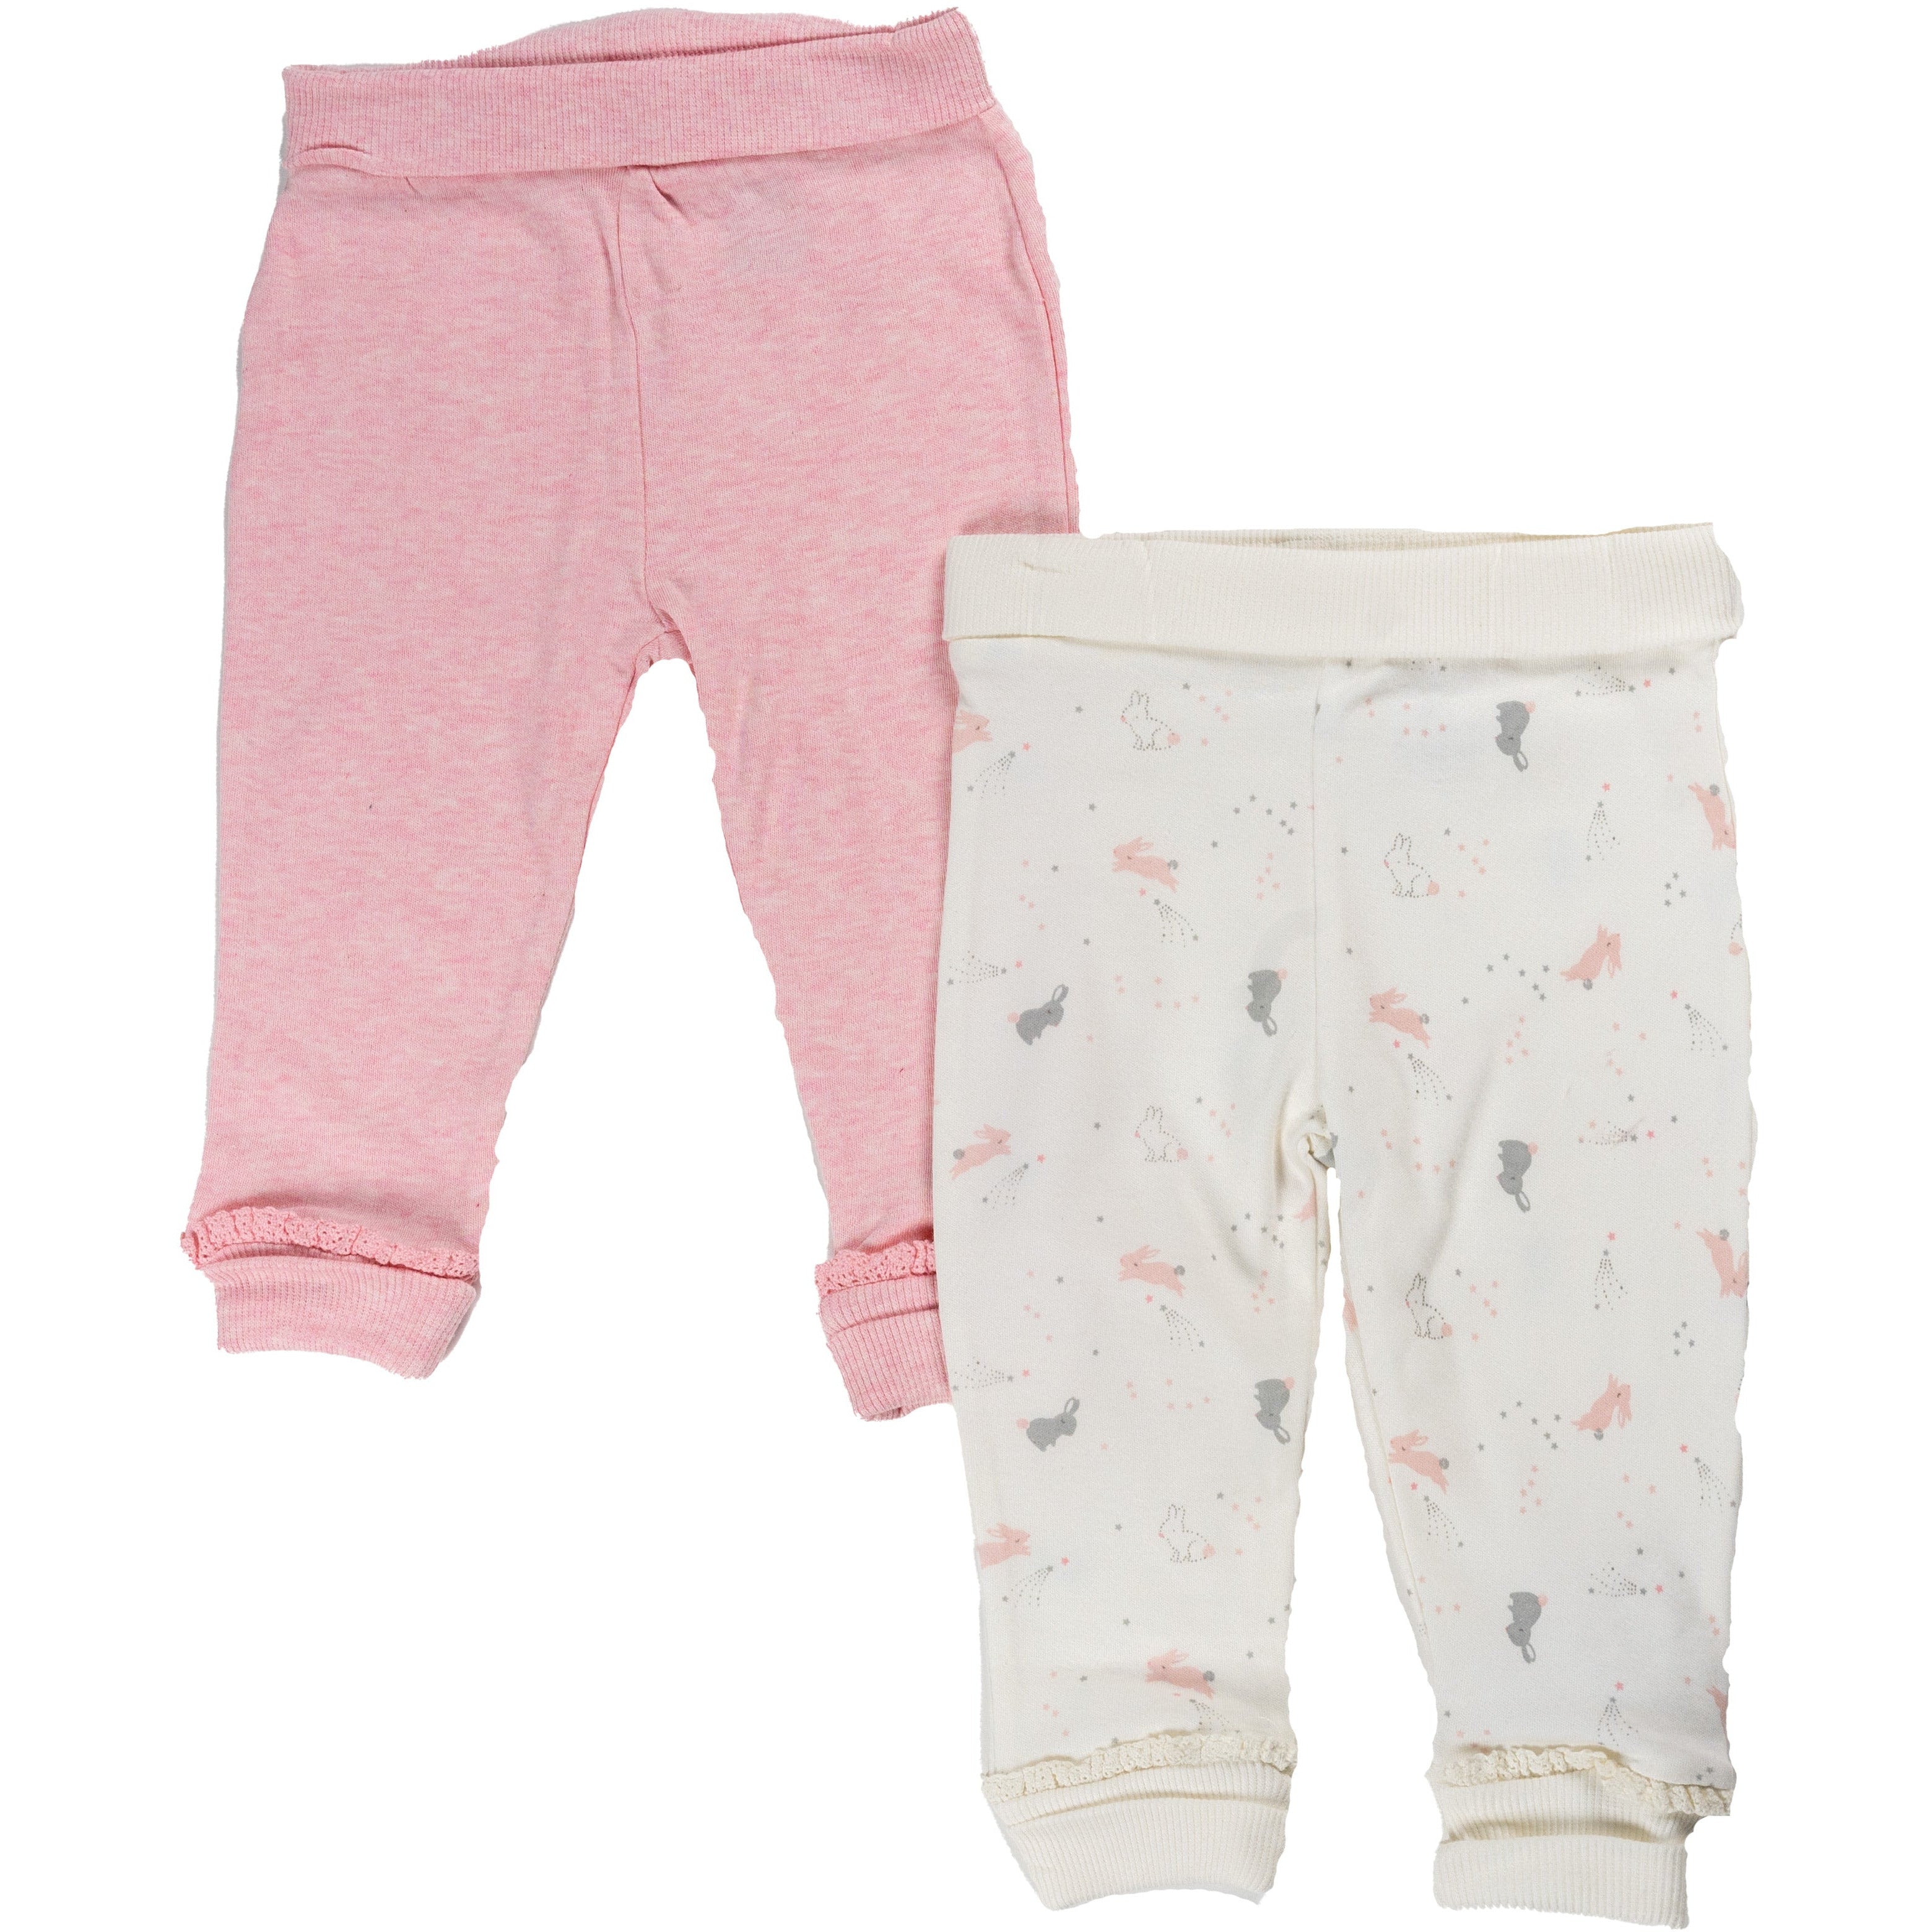 Mothercare My First Girl Little Bunny Trouser Set of 2 Pink/White A478 Age- 3 Months to 24 Months